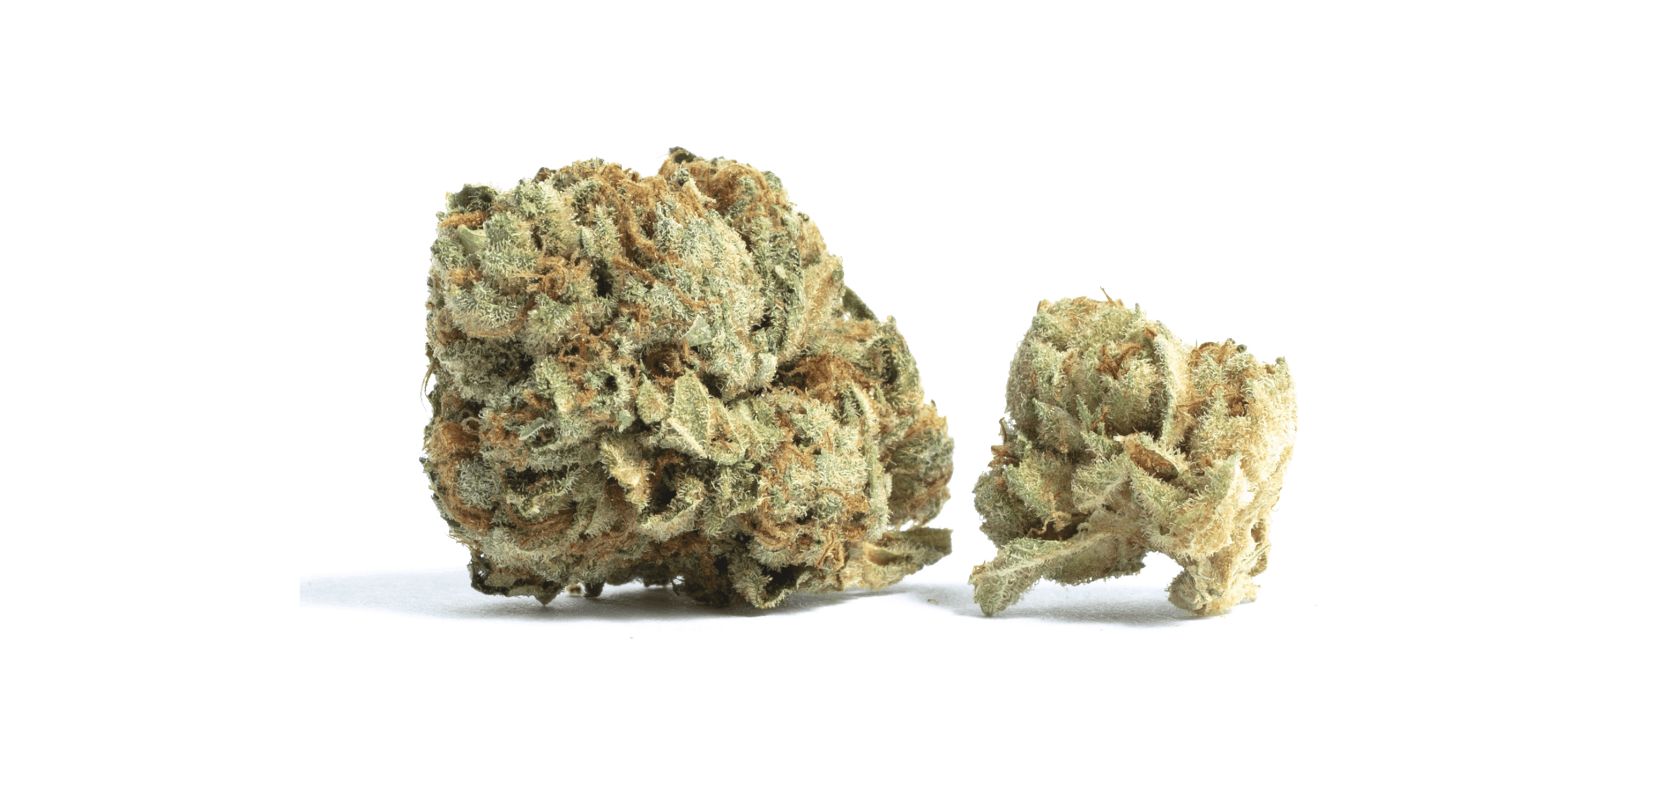 Be sure to buy your Bubba OG strain weed, concentrates and other THC treats from Low Price Bud online weed dispensary.